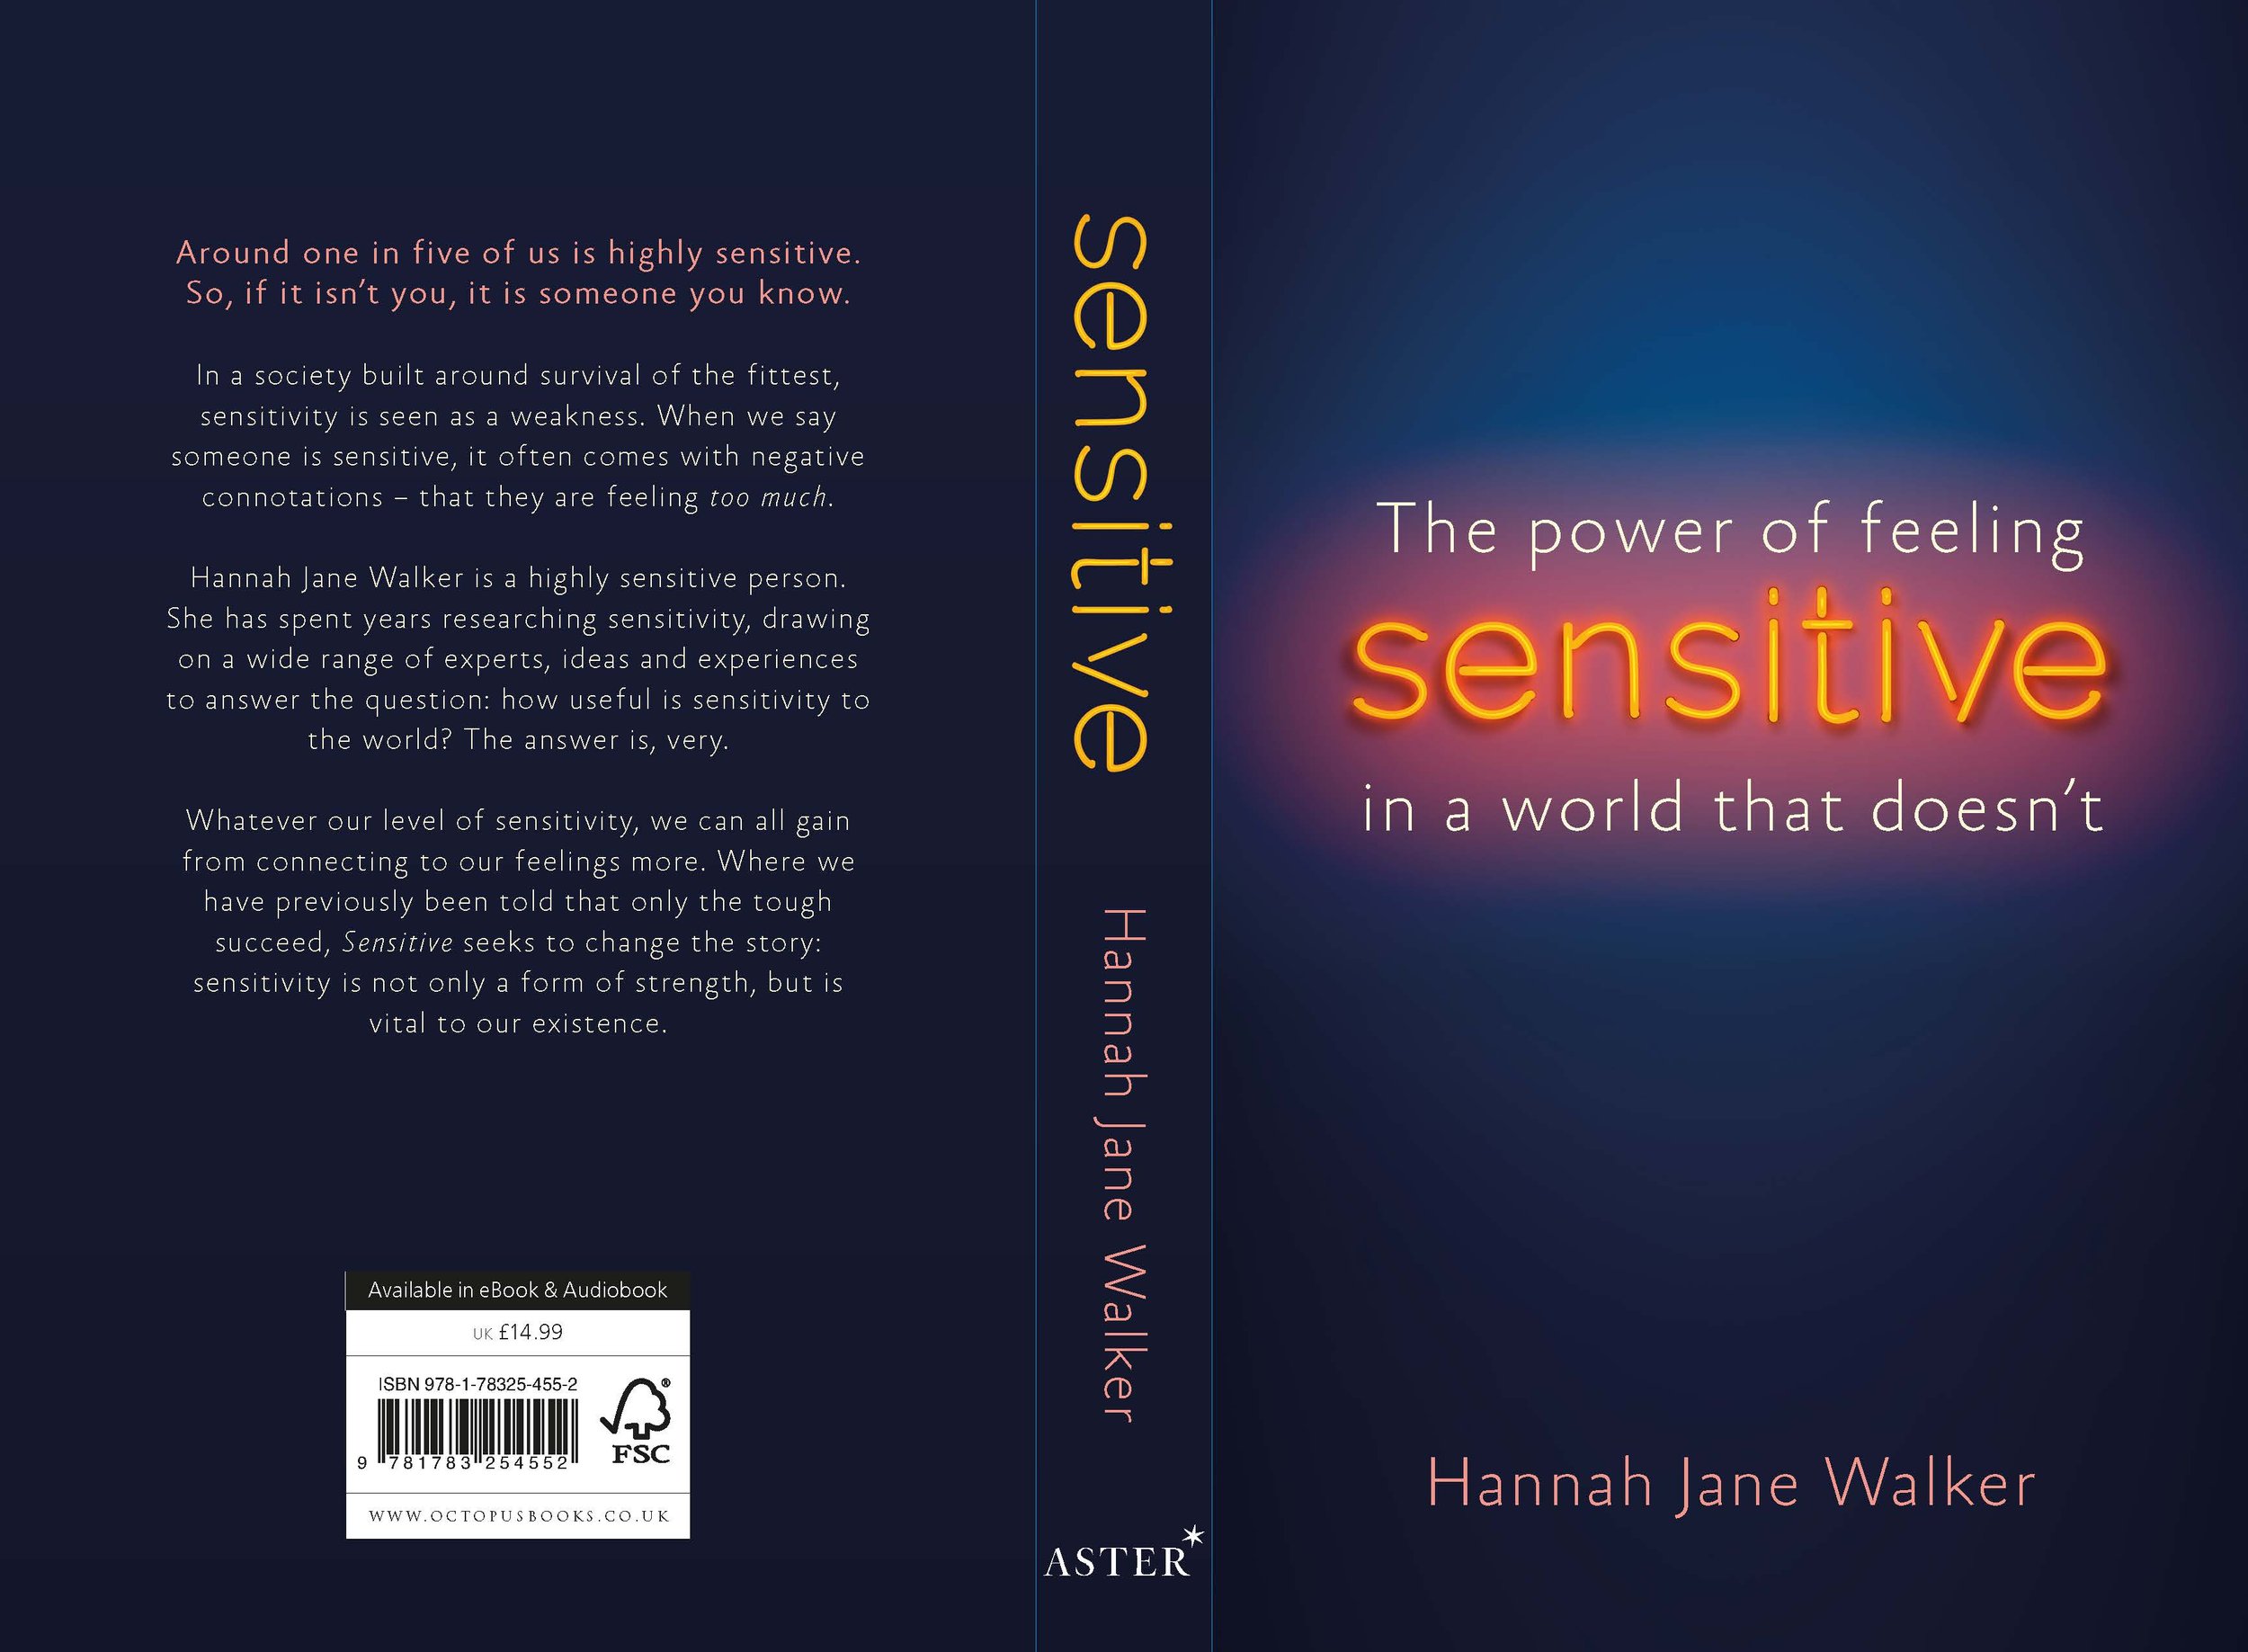 The power of feeling  - Sensitive - in a world that doesn't